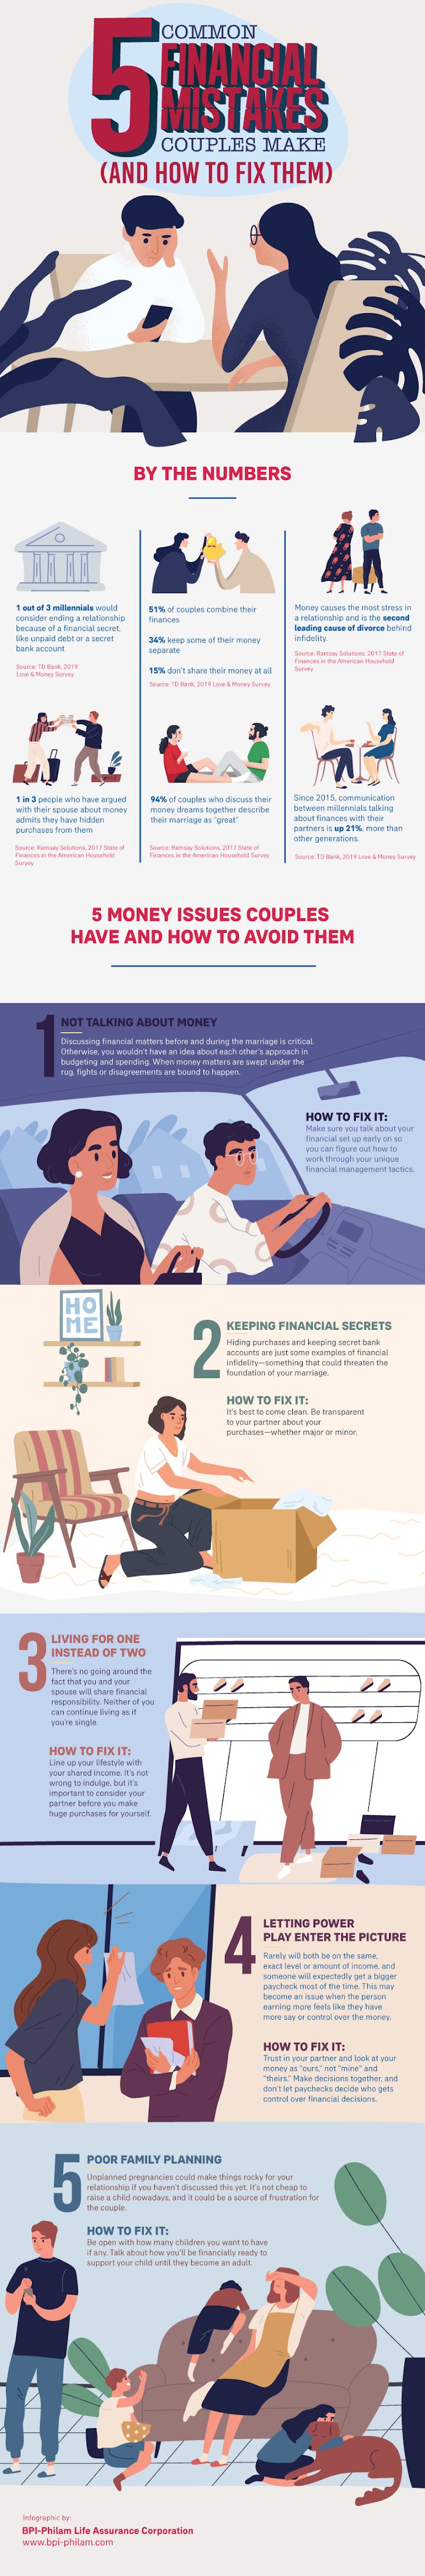 5 Common Financial Mistakes Couples Make (And How To Fix Them) #infographic